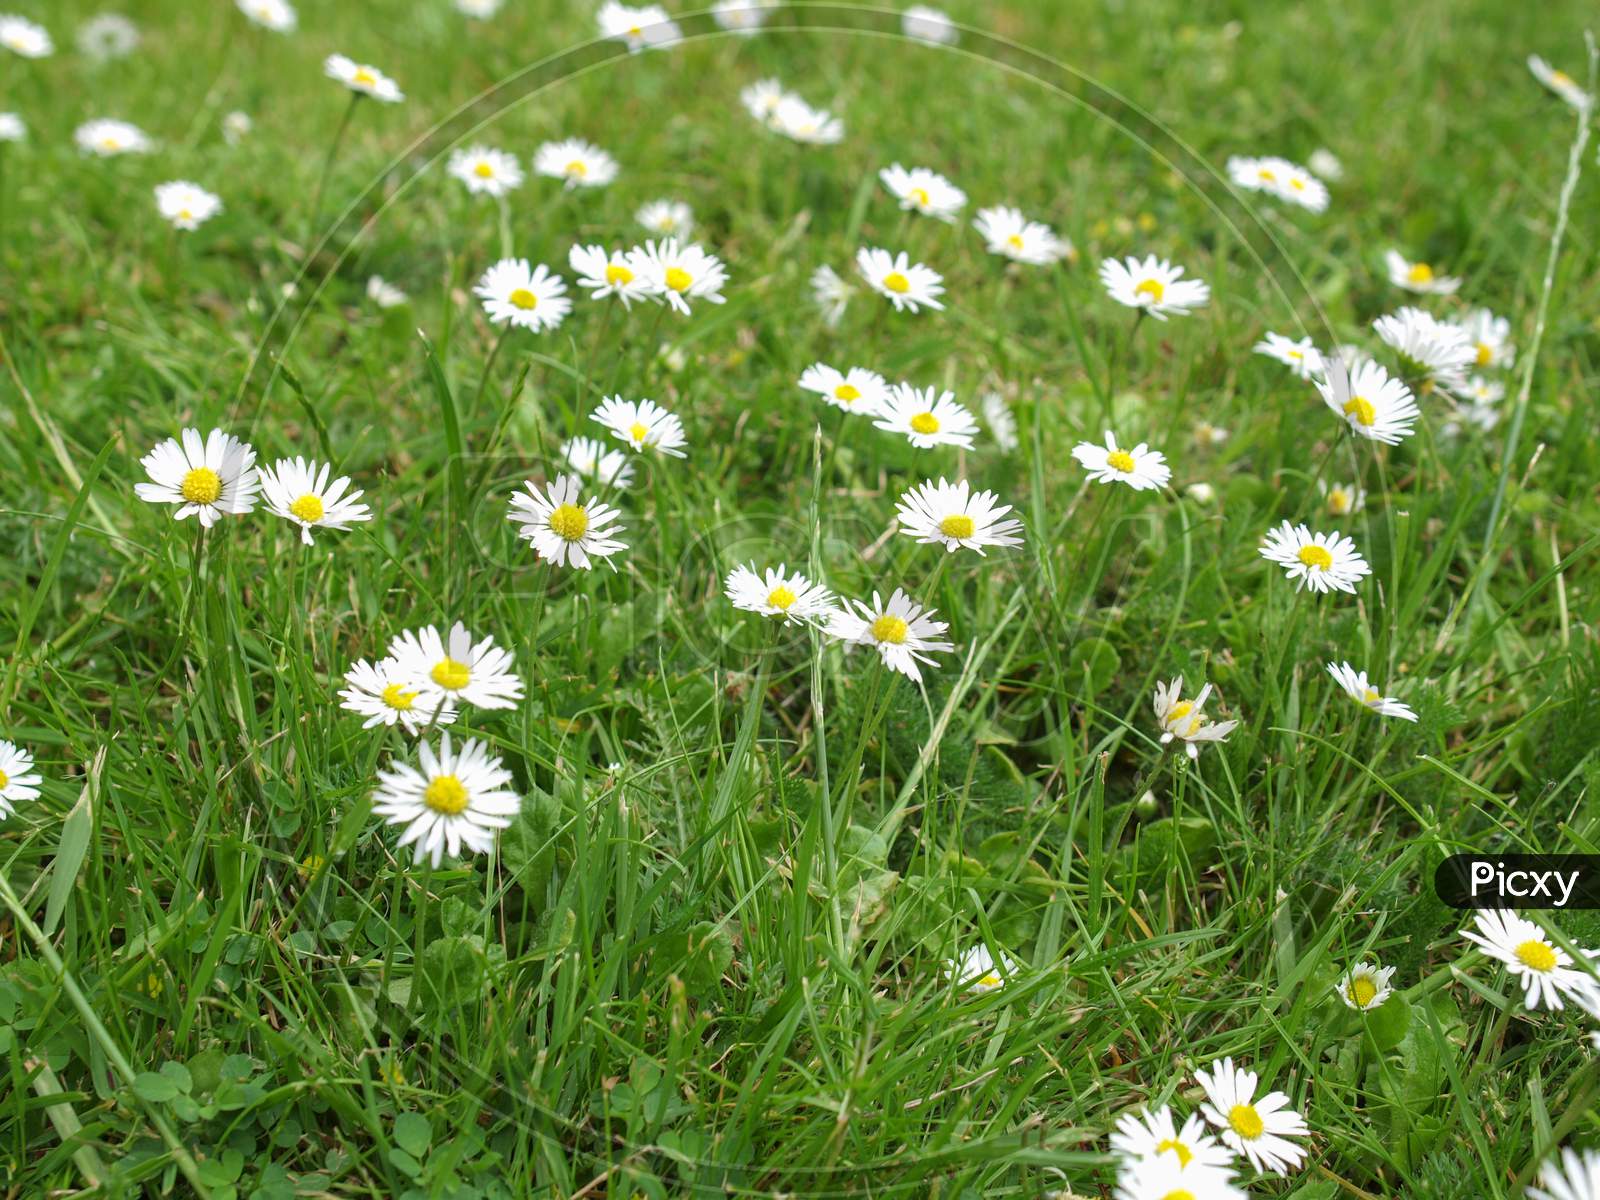 Daisy Flower In The Grass